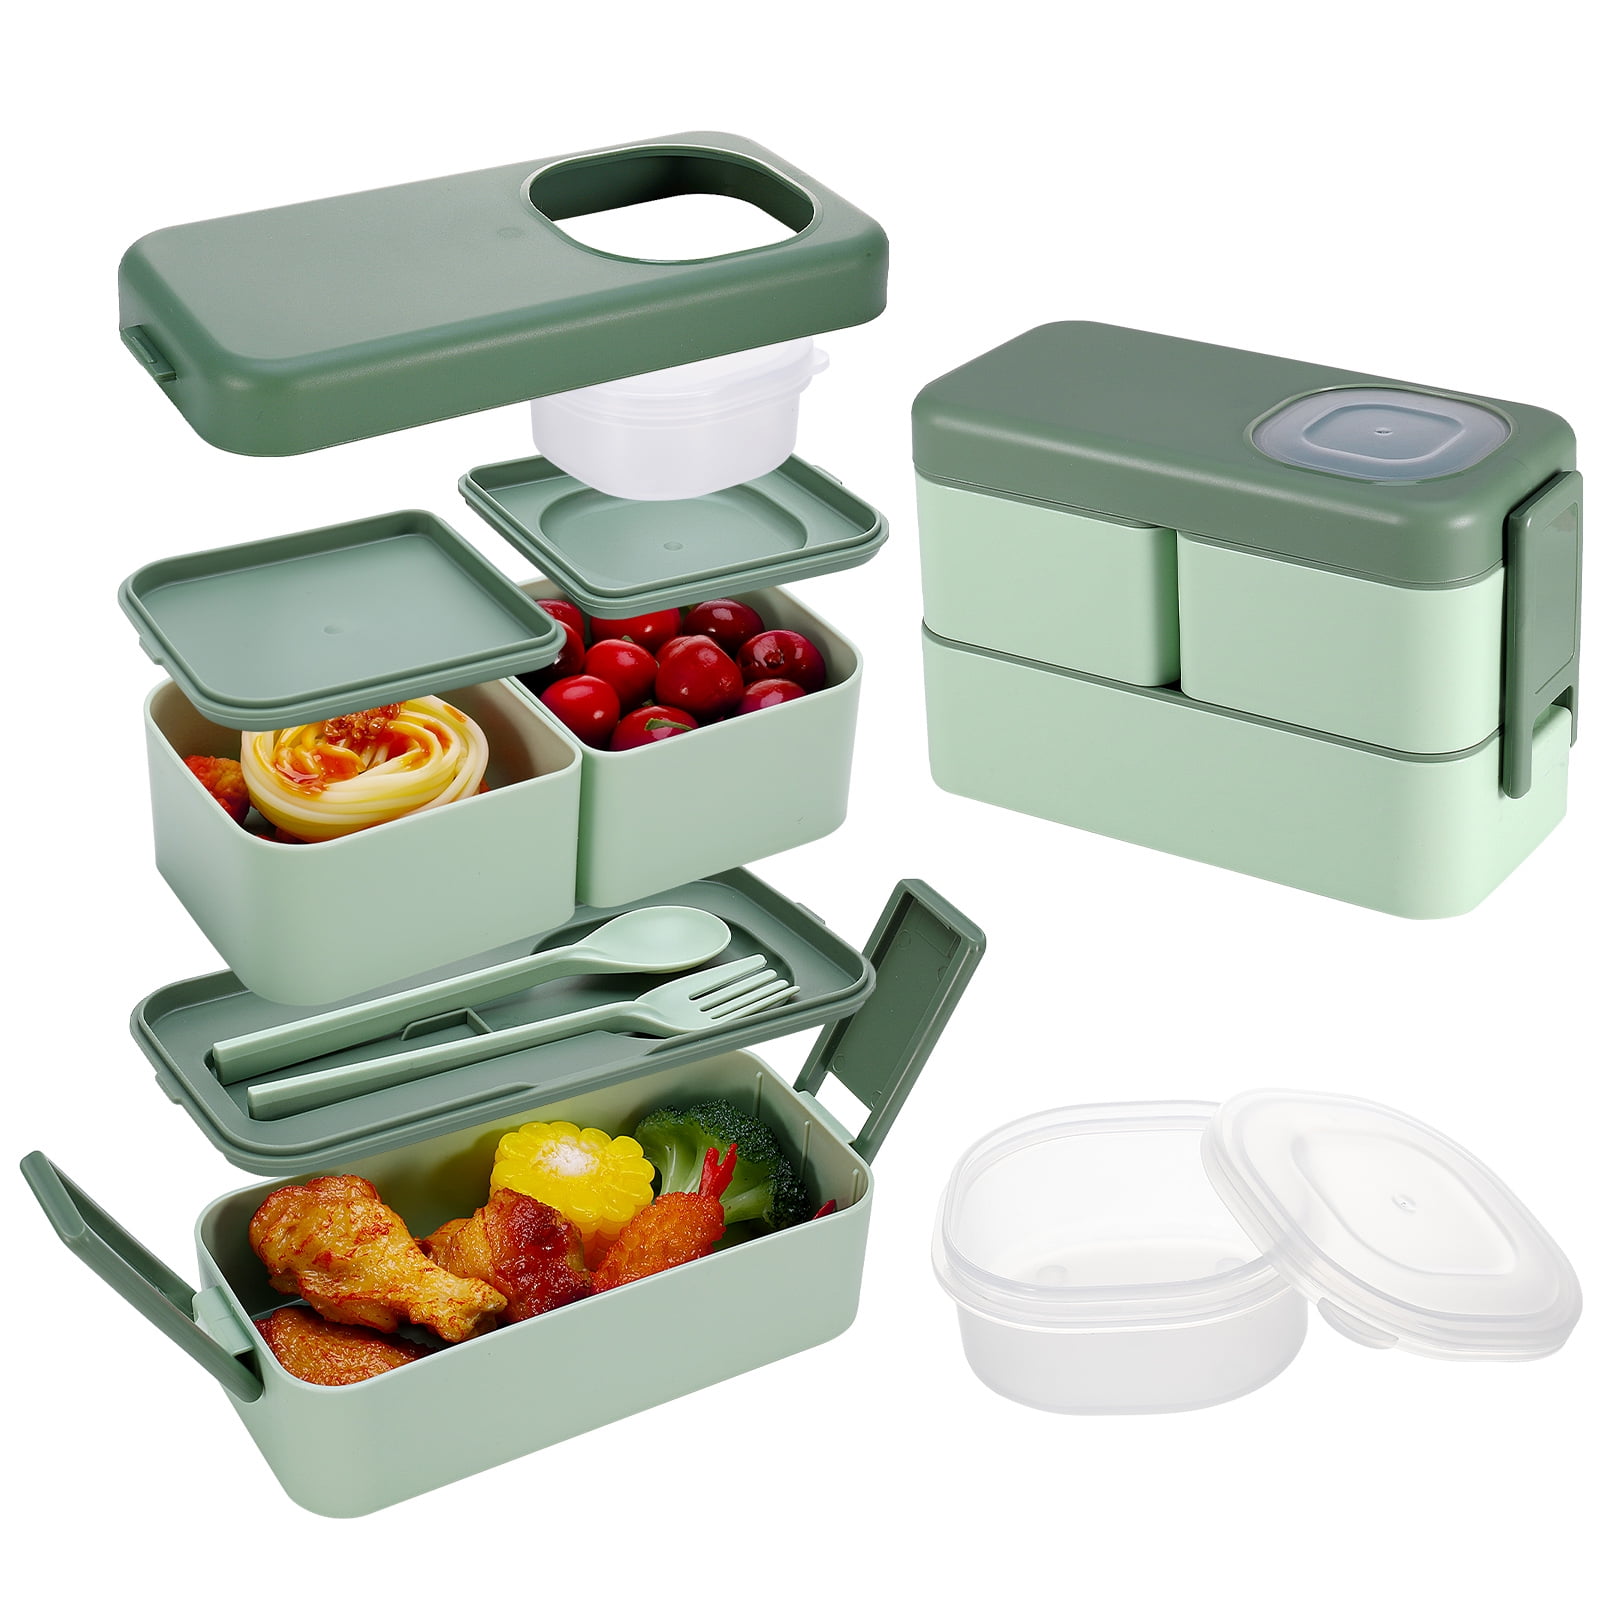 Sinnsally Lunch Box for Adult,1400ml Stackable Japanese Bento Lunch Box for Women,Lunch Containers with Food Compartments,Rectangle Bento Box with